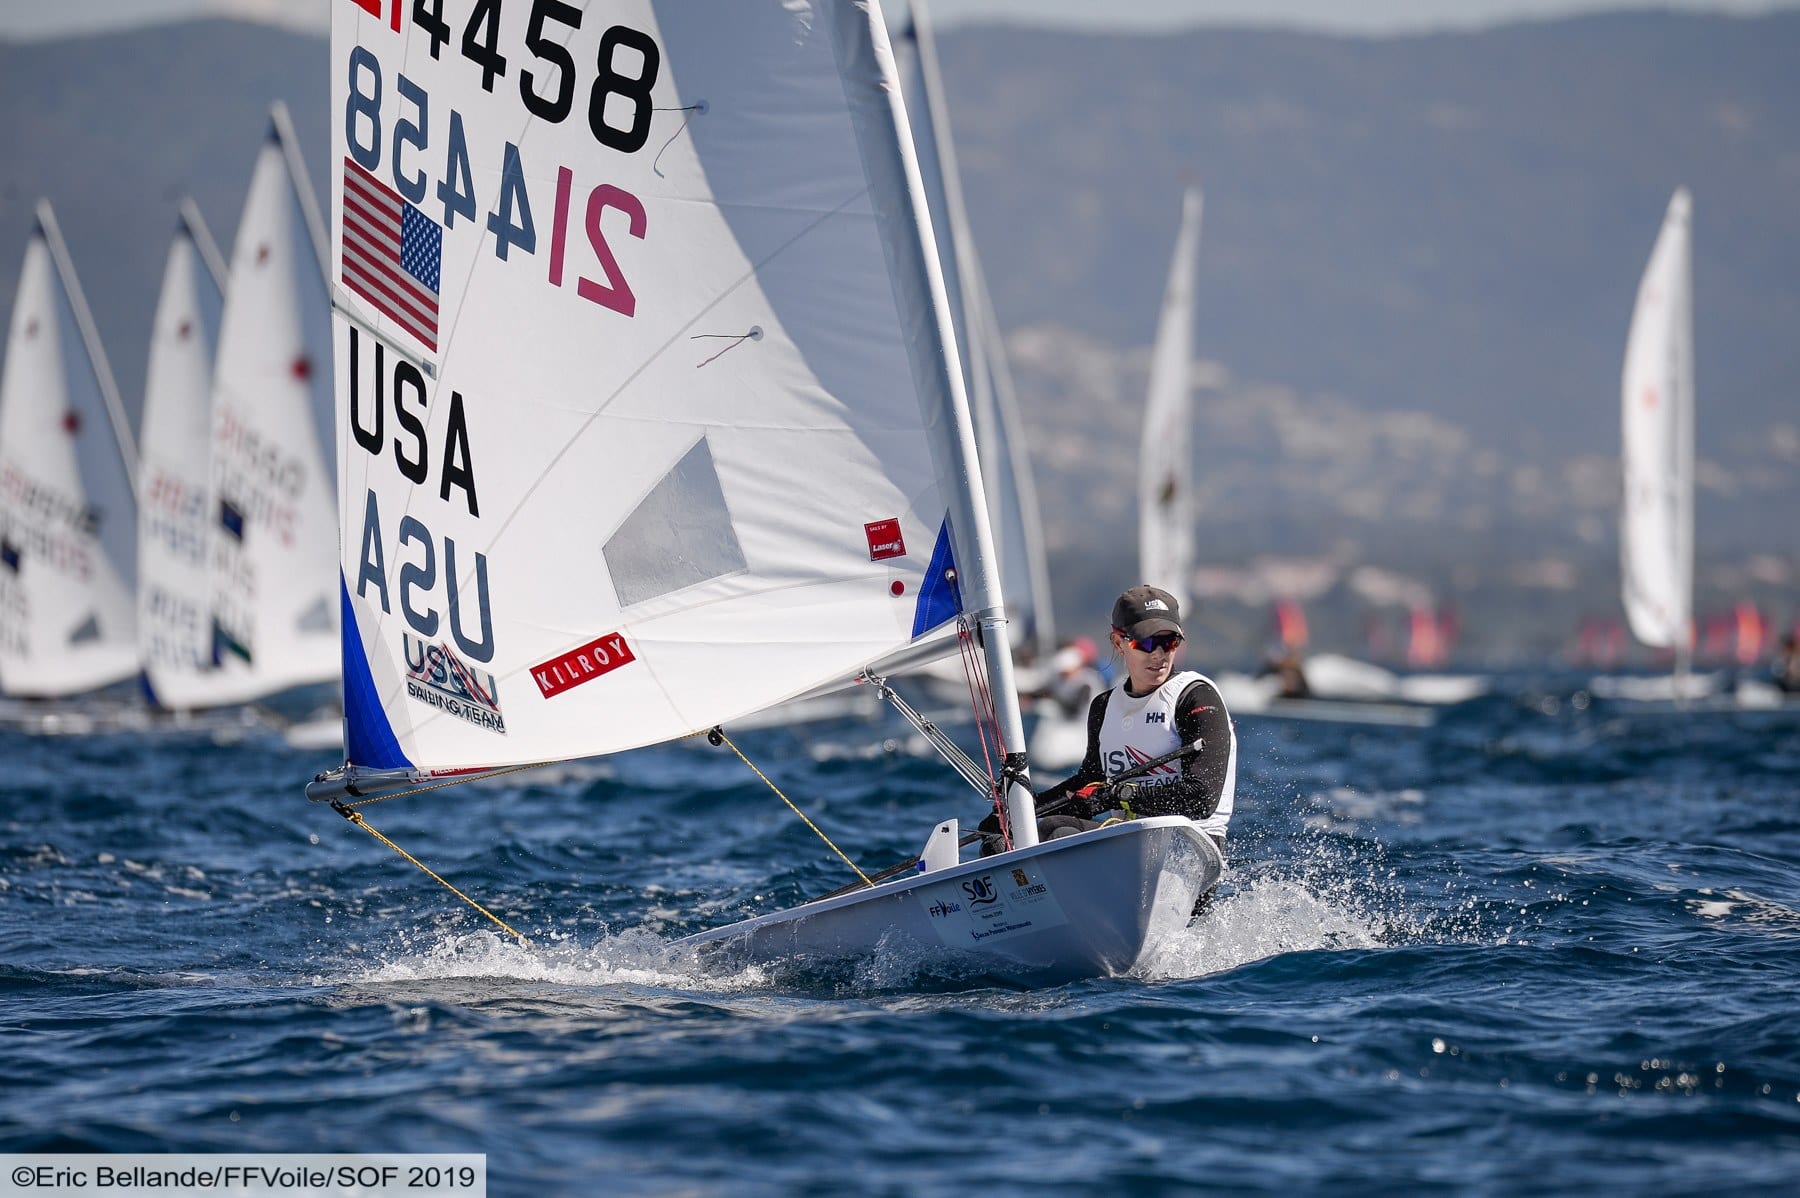 Paige Railey, US Laser Radial Athlete at French Olympic Week 2019